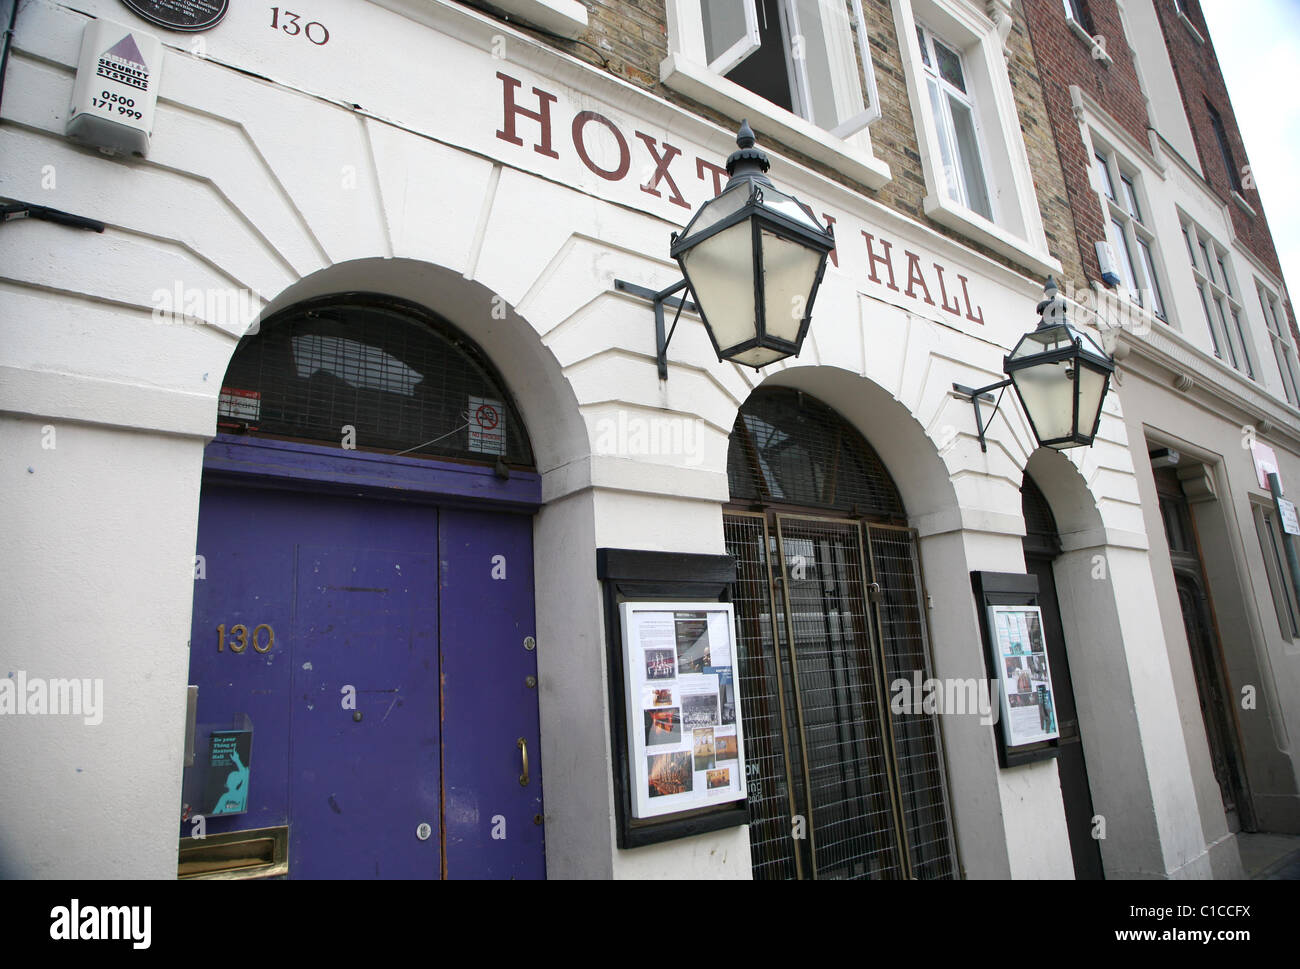 Genral View GV of Hoxton Hall, an entertainment venue in Hoxton, London, England. Stock Photo